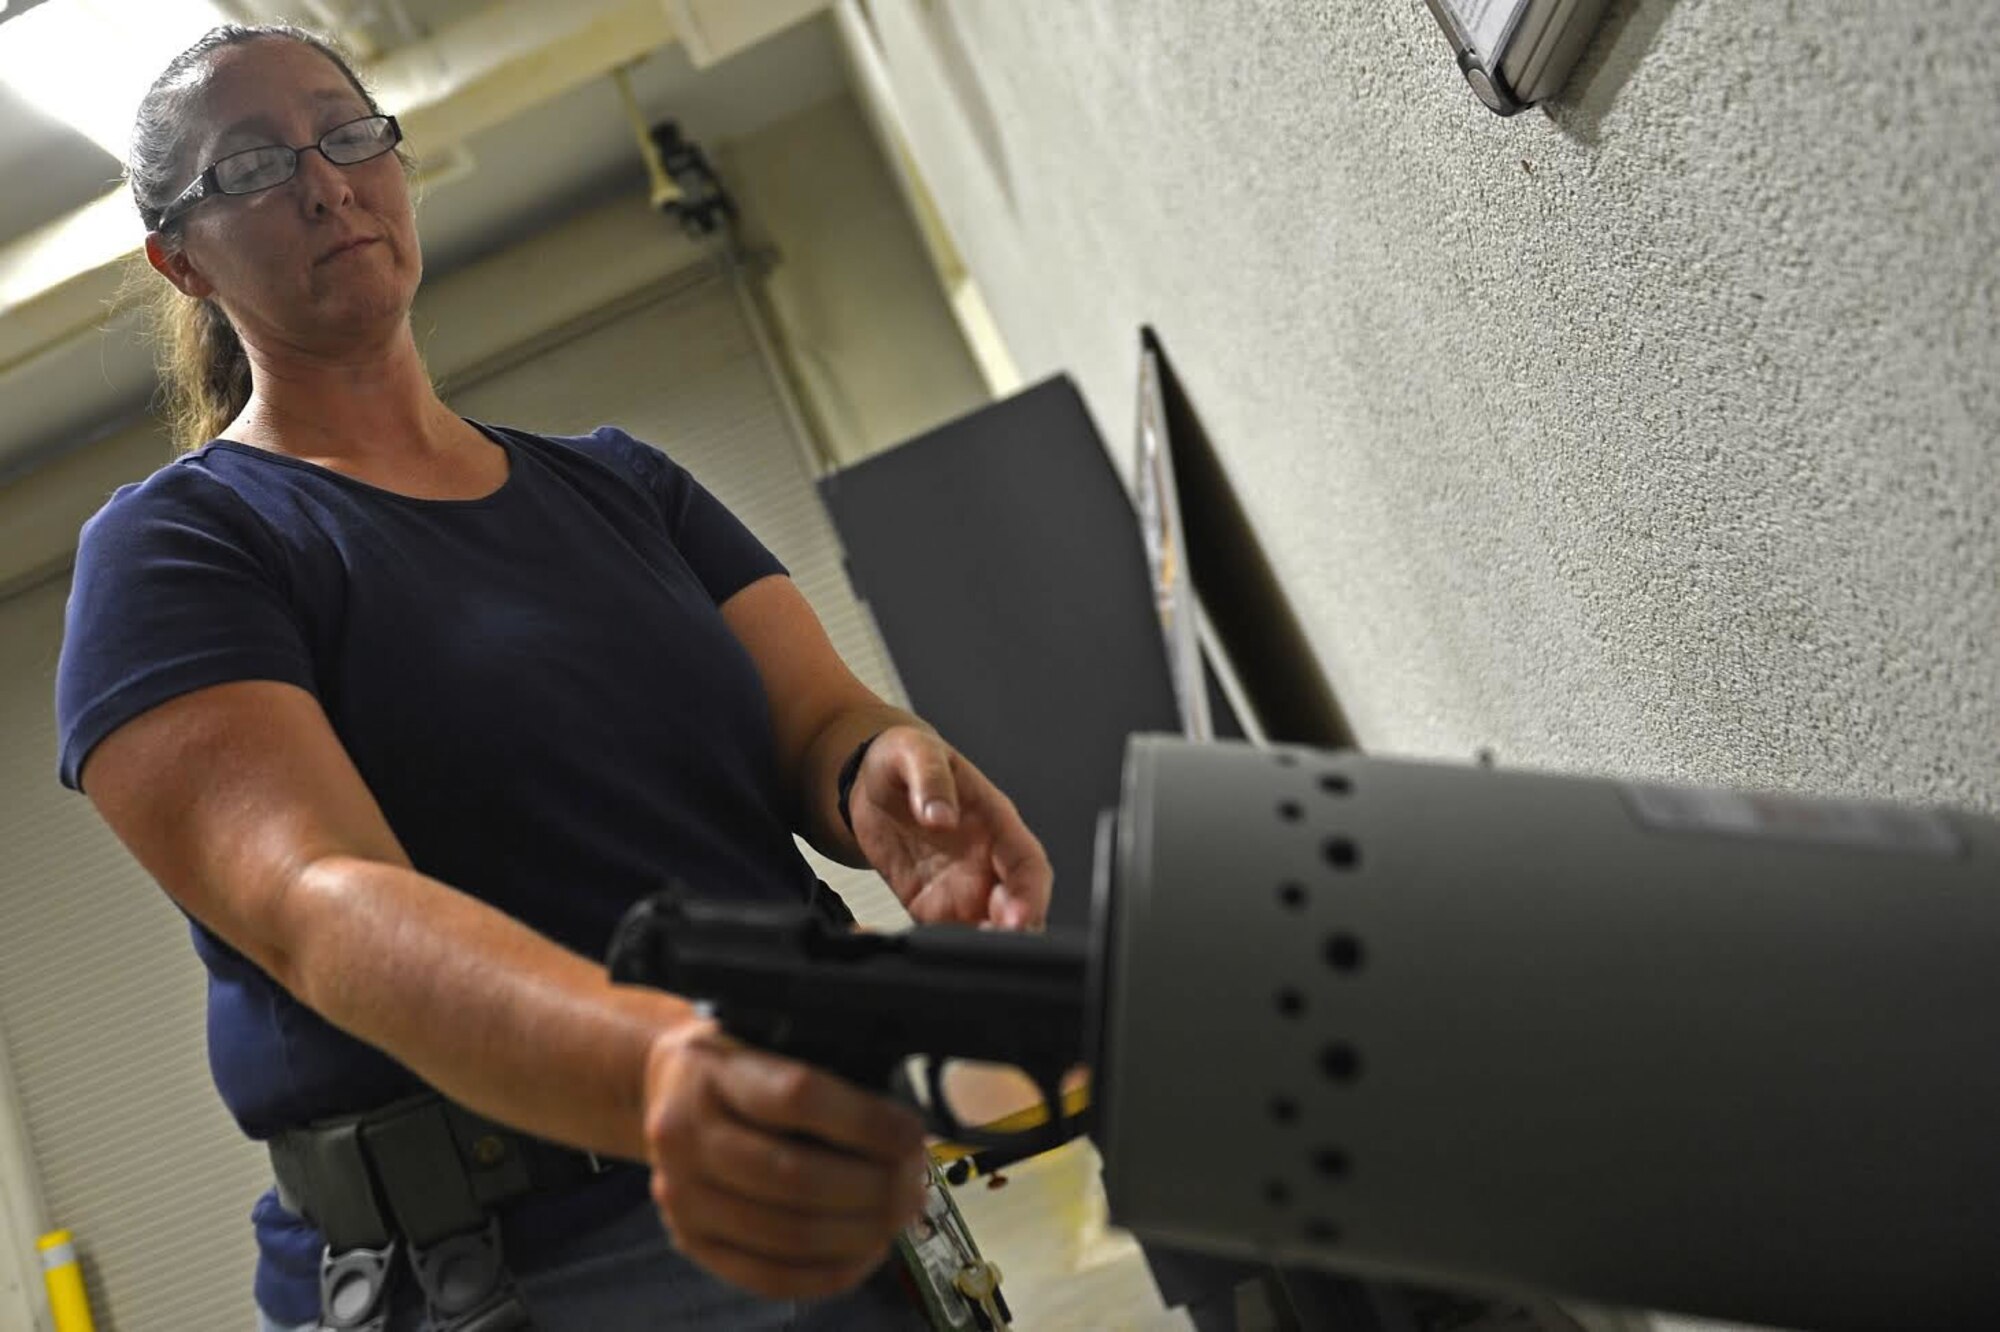 Laura Jones, 20th Logistics Readiness Squadron logistics readiness technician, clears an M9 pistol at Shaw Air Force Base, S.C., Aug. 5, 2016. This year Jones has supplied over 100 M9s and M4 carbines, and provided individual protective equipment for over 3,000 Team Shaw members. (U.S. Air Force photo by Airman 1st Class Christopher Maldonado)